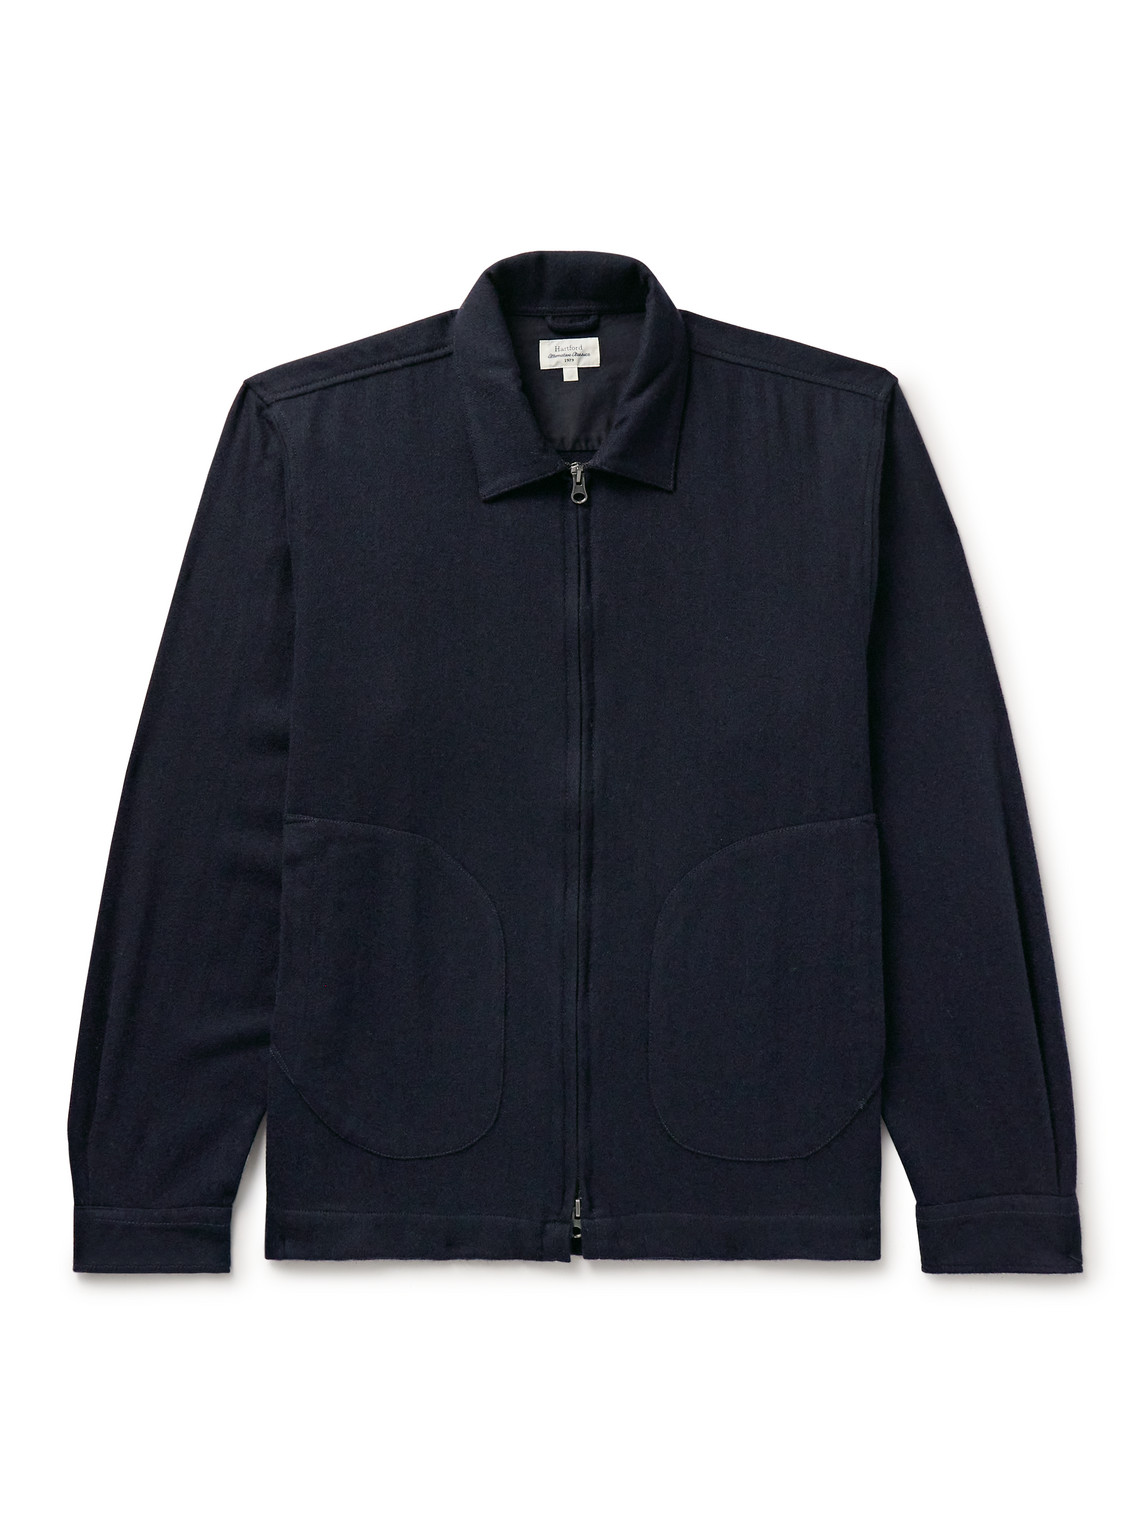 Del Recycled Wool-Blend Jacket